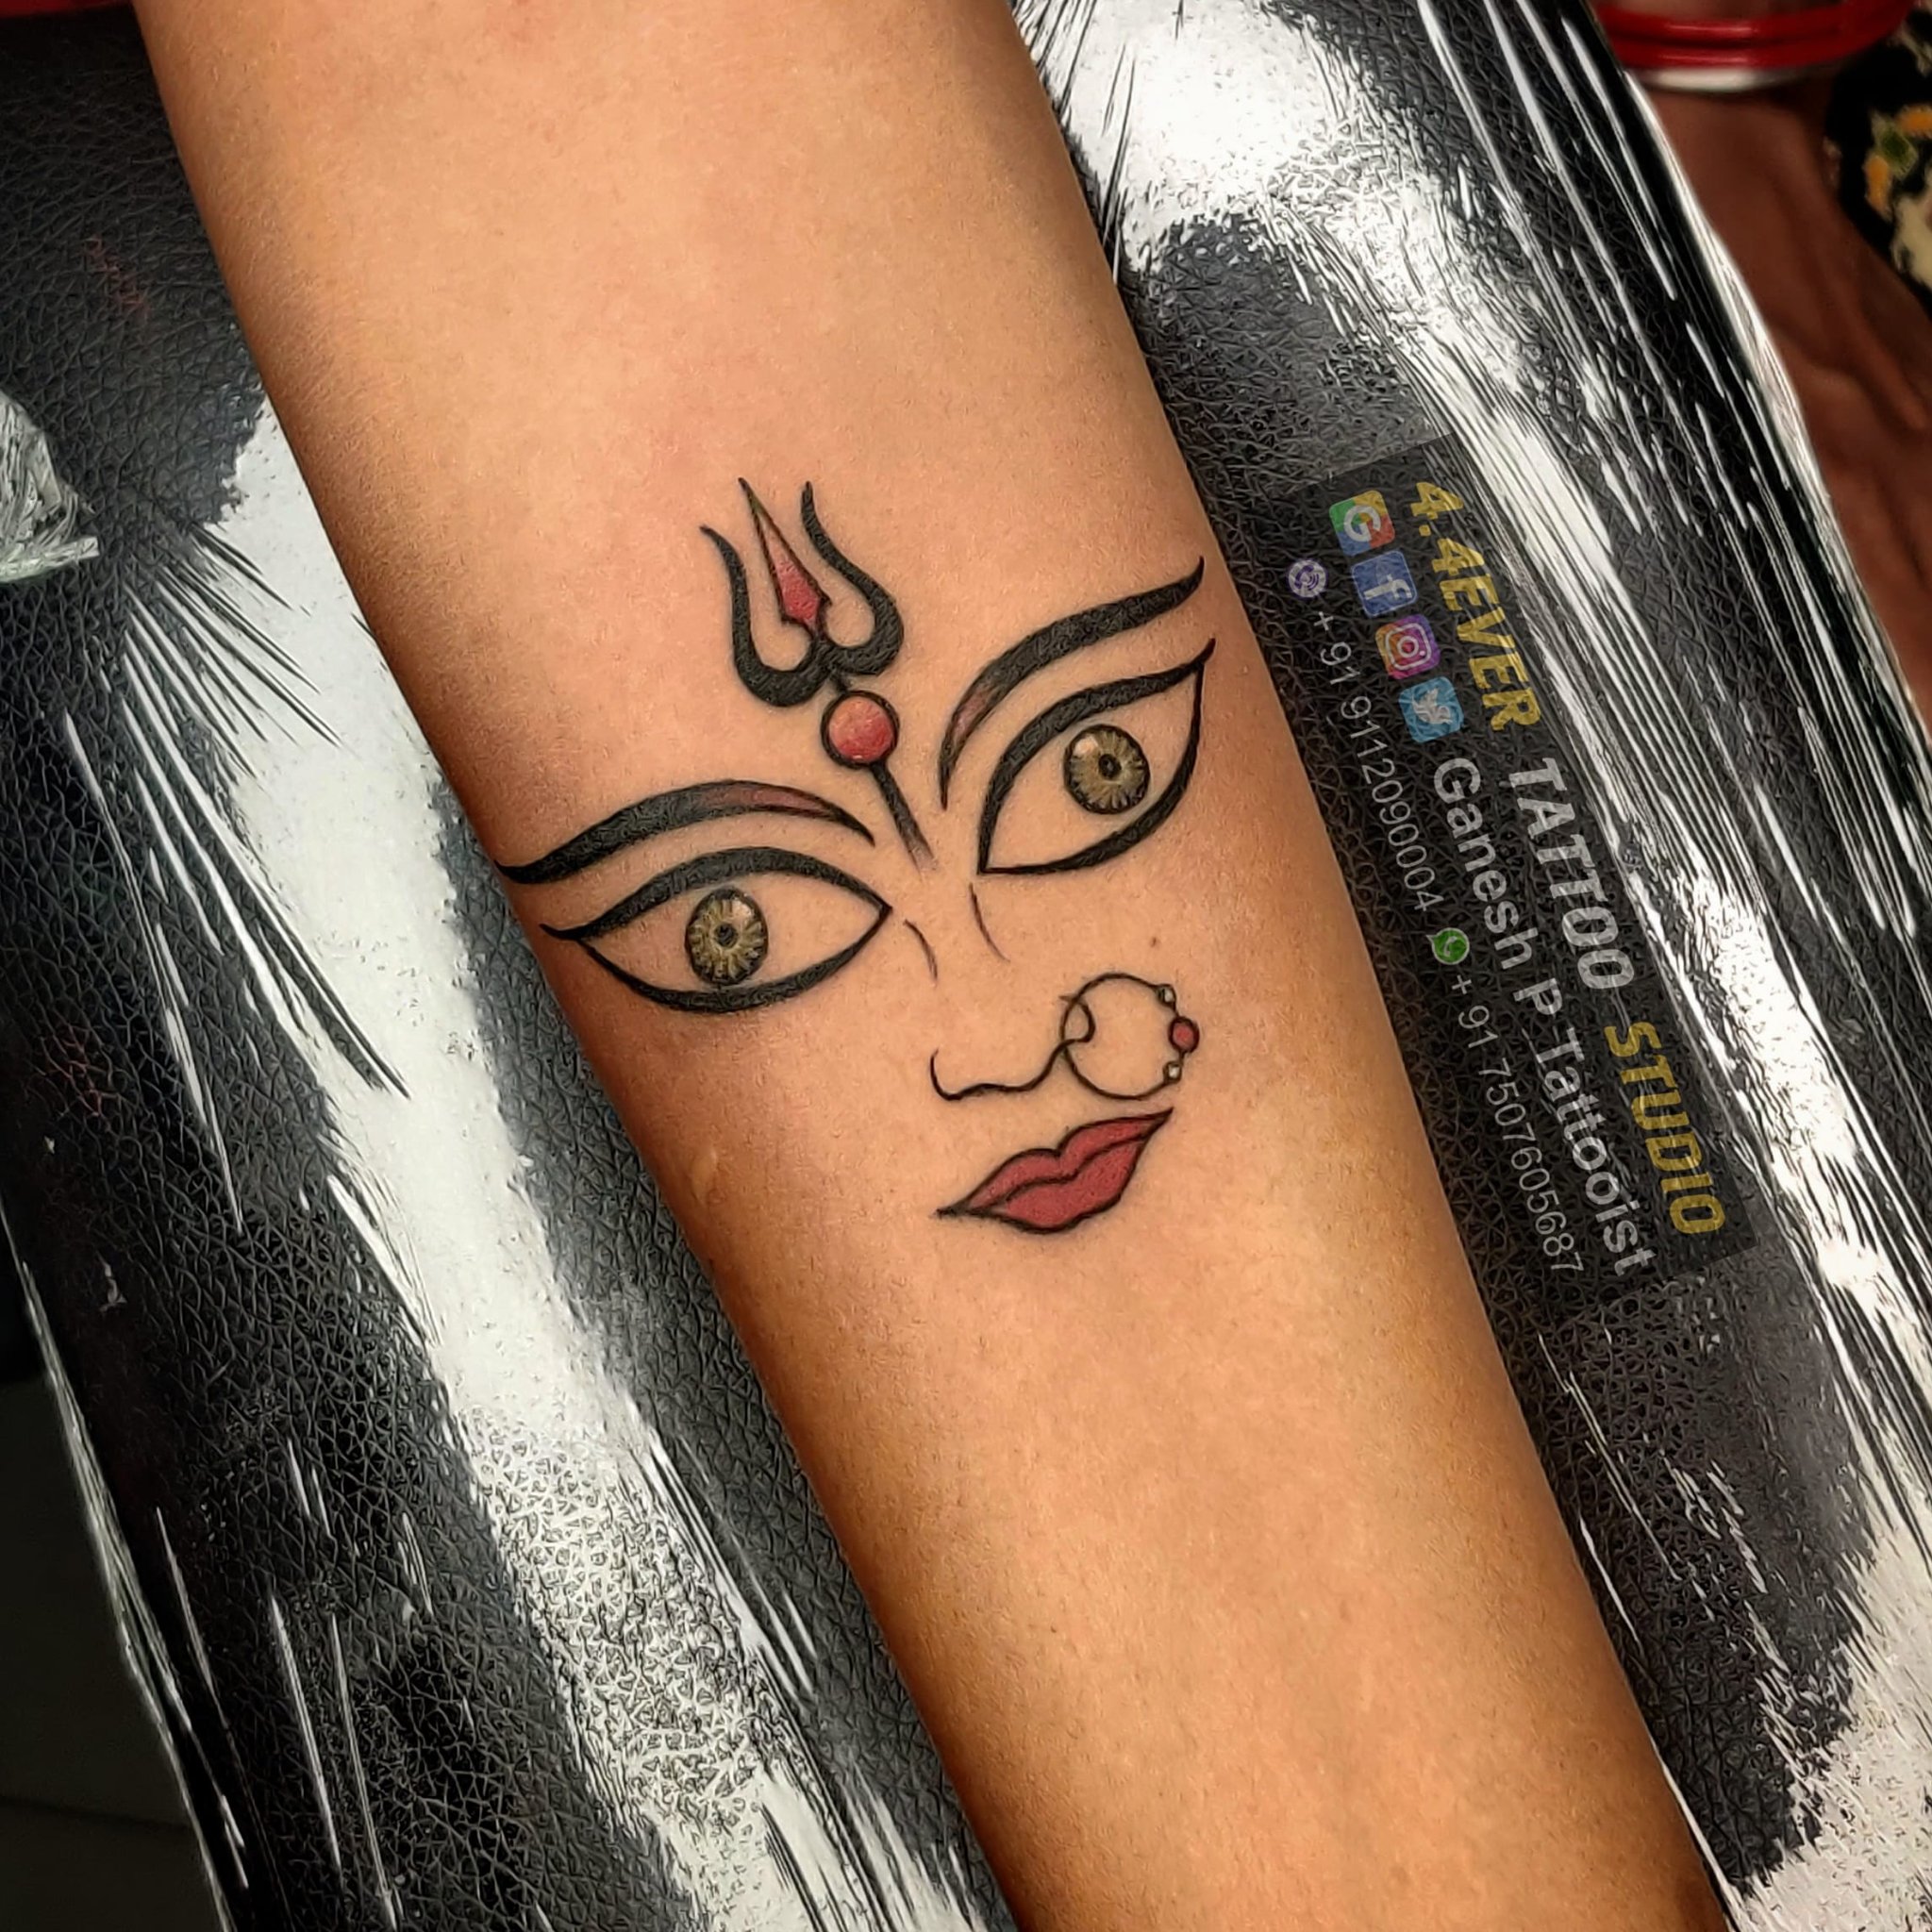 Tattoo uploaded by Red Baron Ink  Durga tattoo done by Sue  Tattoodo